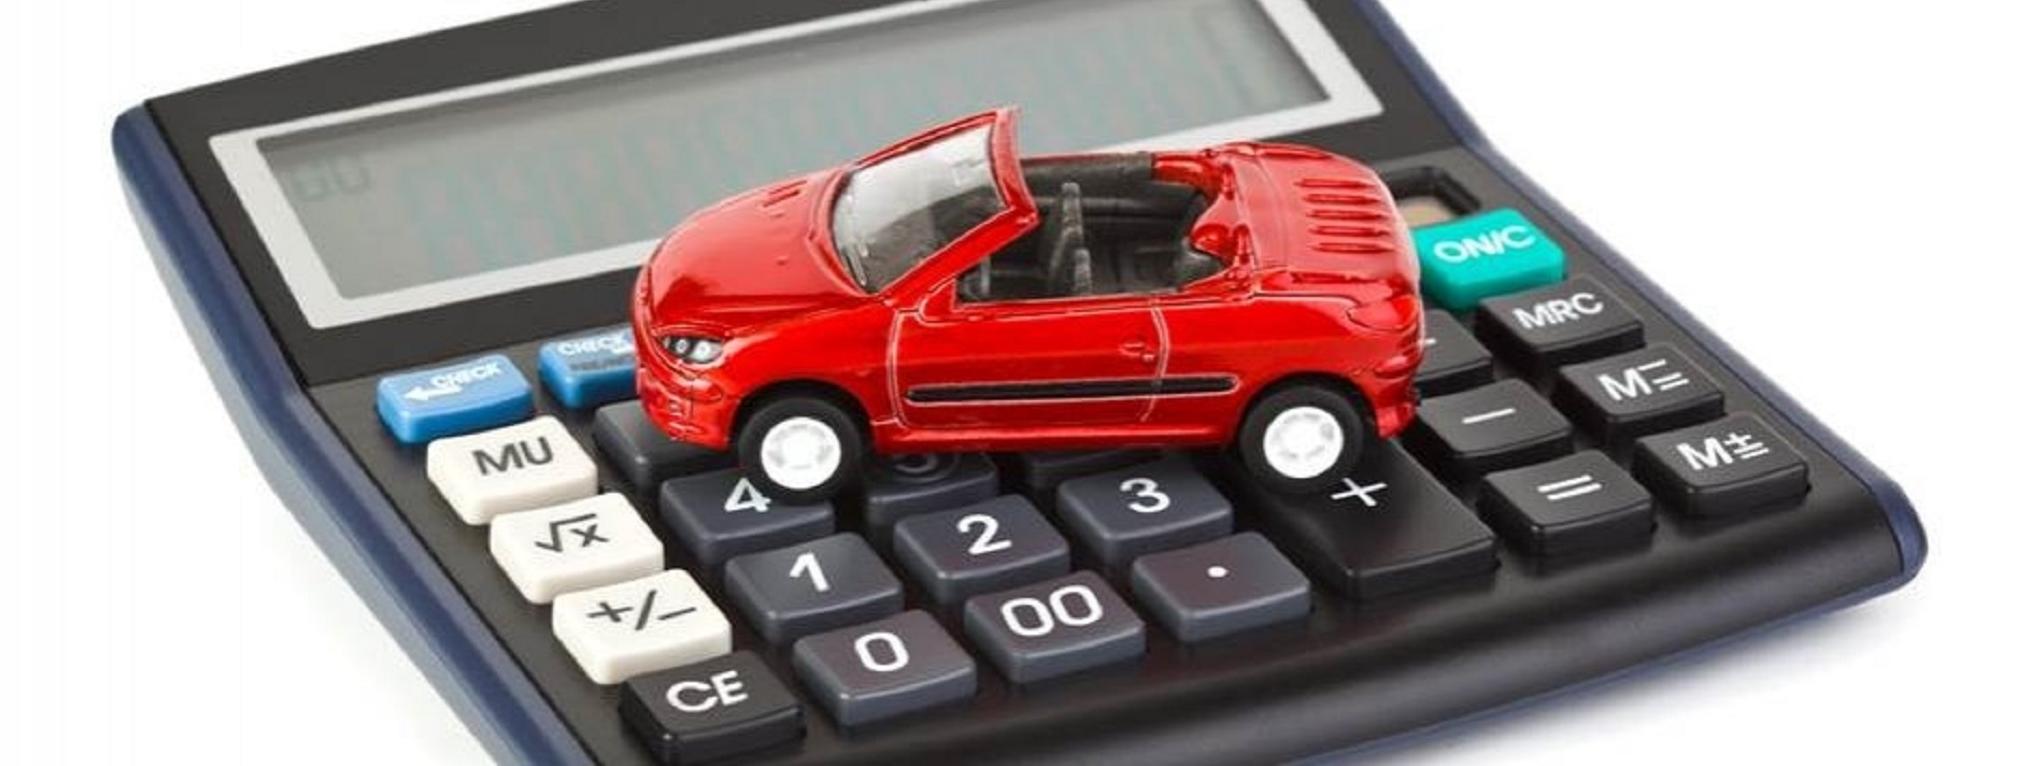 Buying Car Insurance For Used Cars